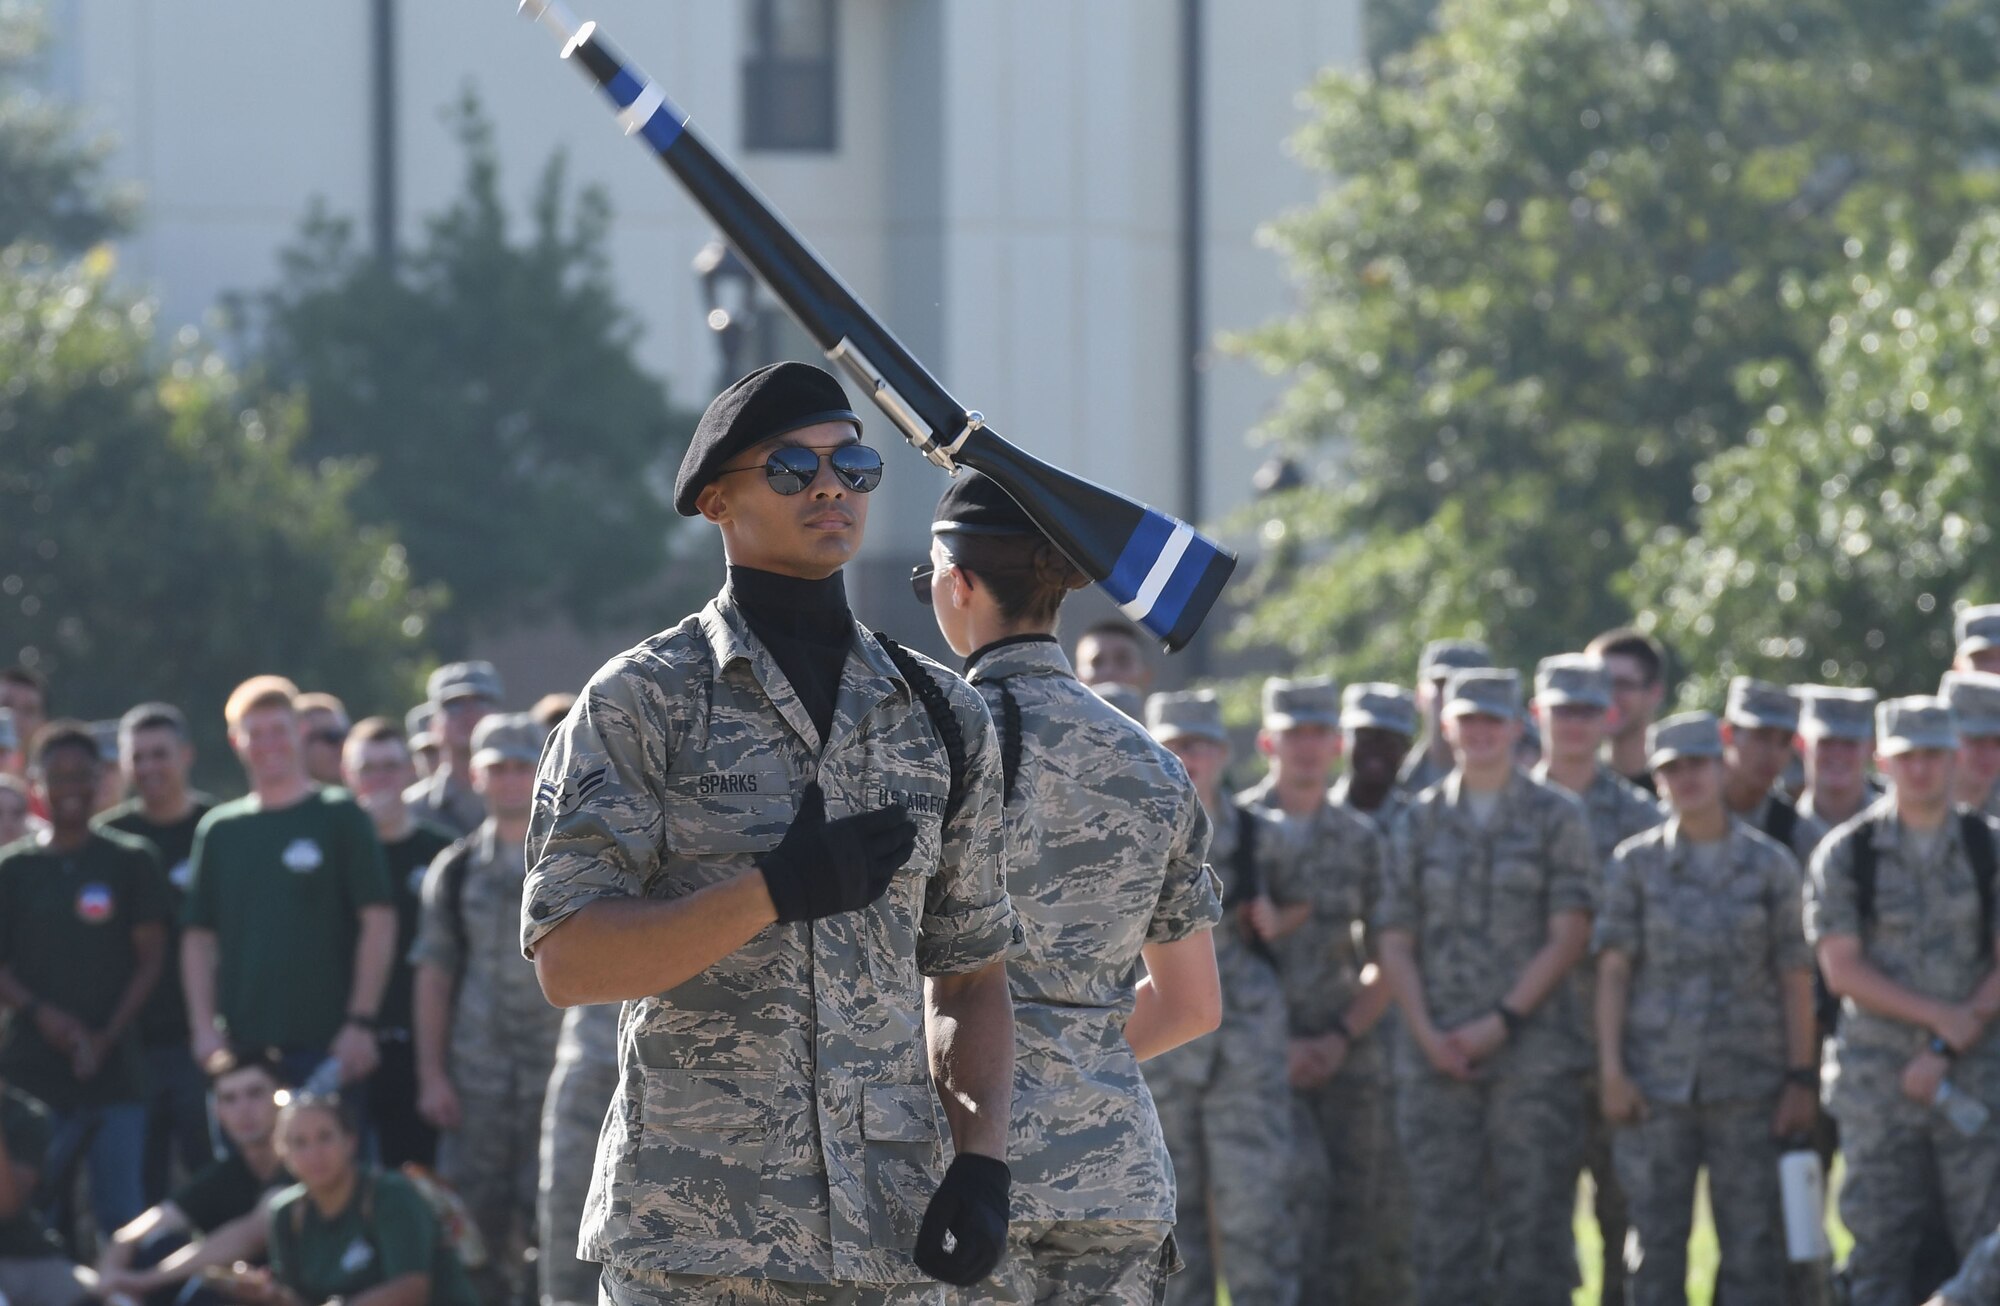 U.S. Air Force Airman 1st Class Rocky Sparks, 334th Training Squadron freestyle drill team member, performs during the 81st Training Group drill down on the Levitow Training Support Facility drill pad at Keesler Air Force Base, Mississippi, Sept. 7, 2018. Airmen from the 81st TRG competed in a quarterly open ranks inspection, regulation drill routine and freestyle drill routine. (U.S. Air Force photo by Kemberly Groue)